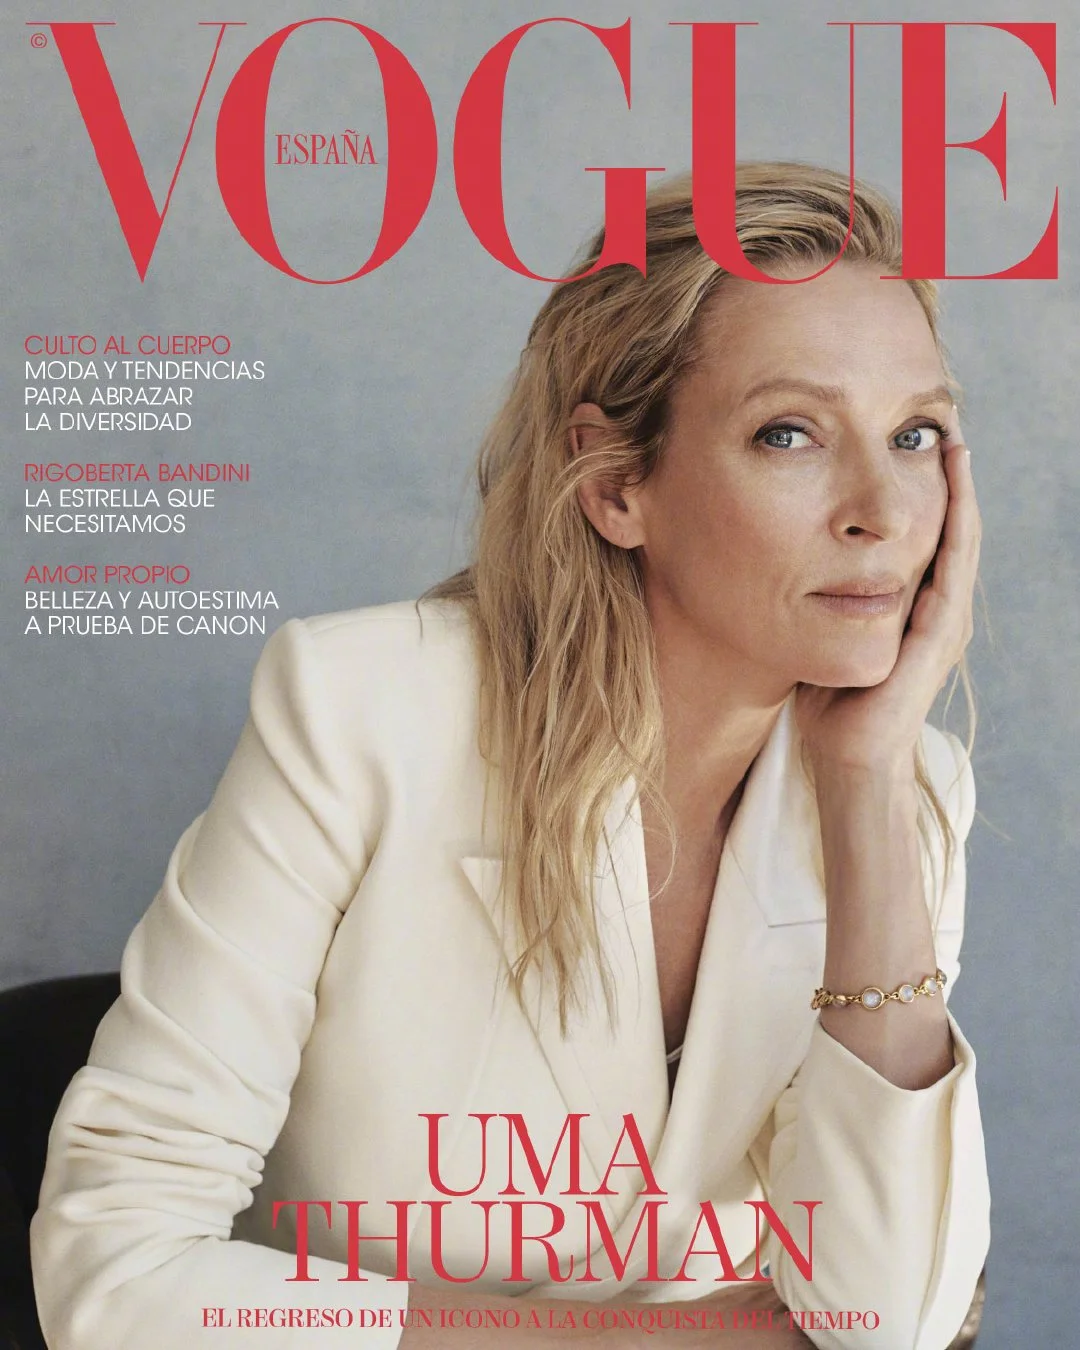 Uma Thurman, photo of the March issue of Vogue Spain ​​​